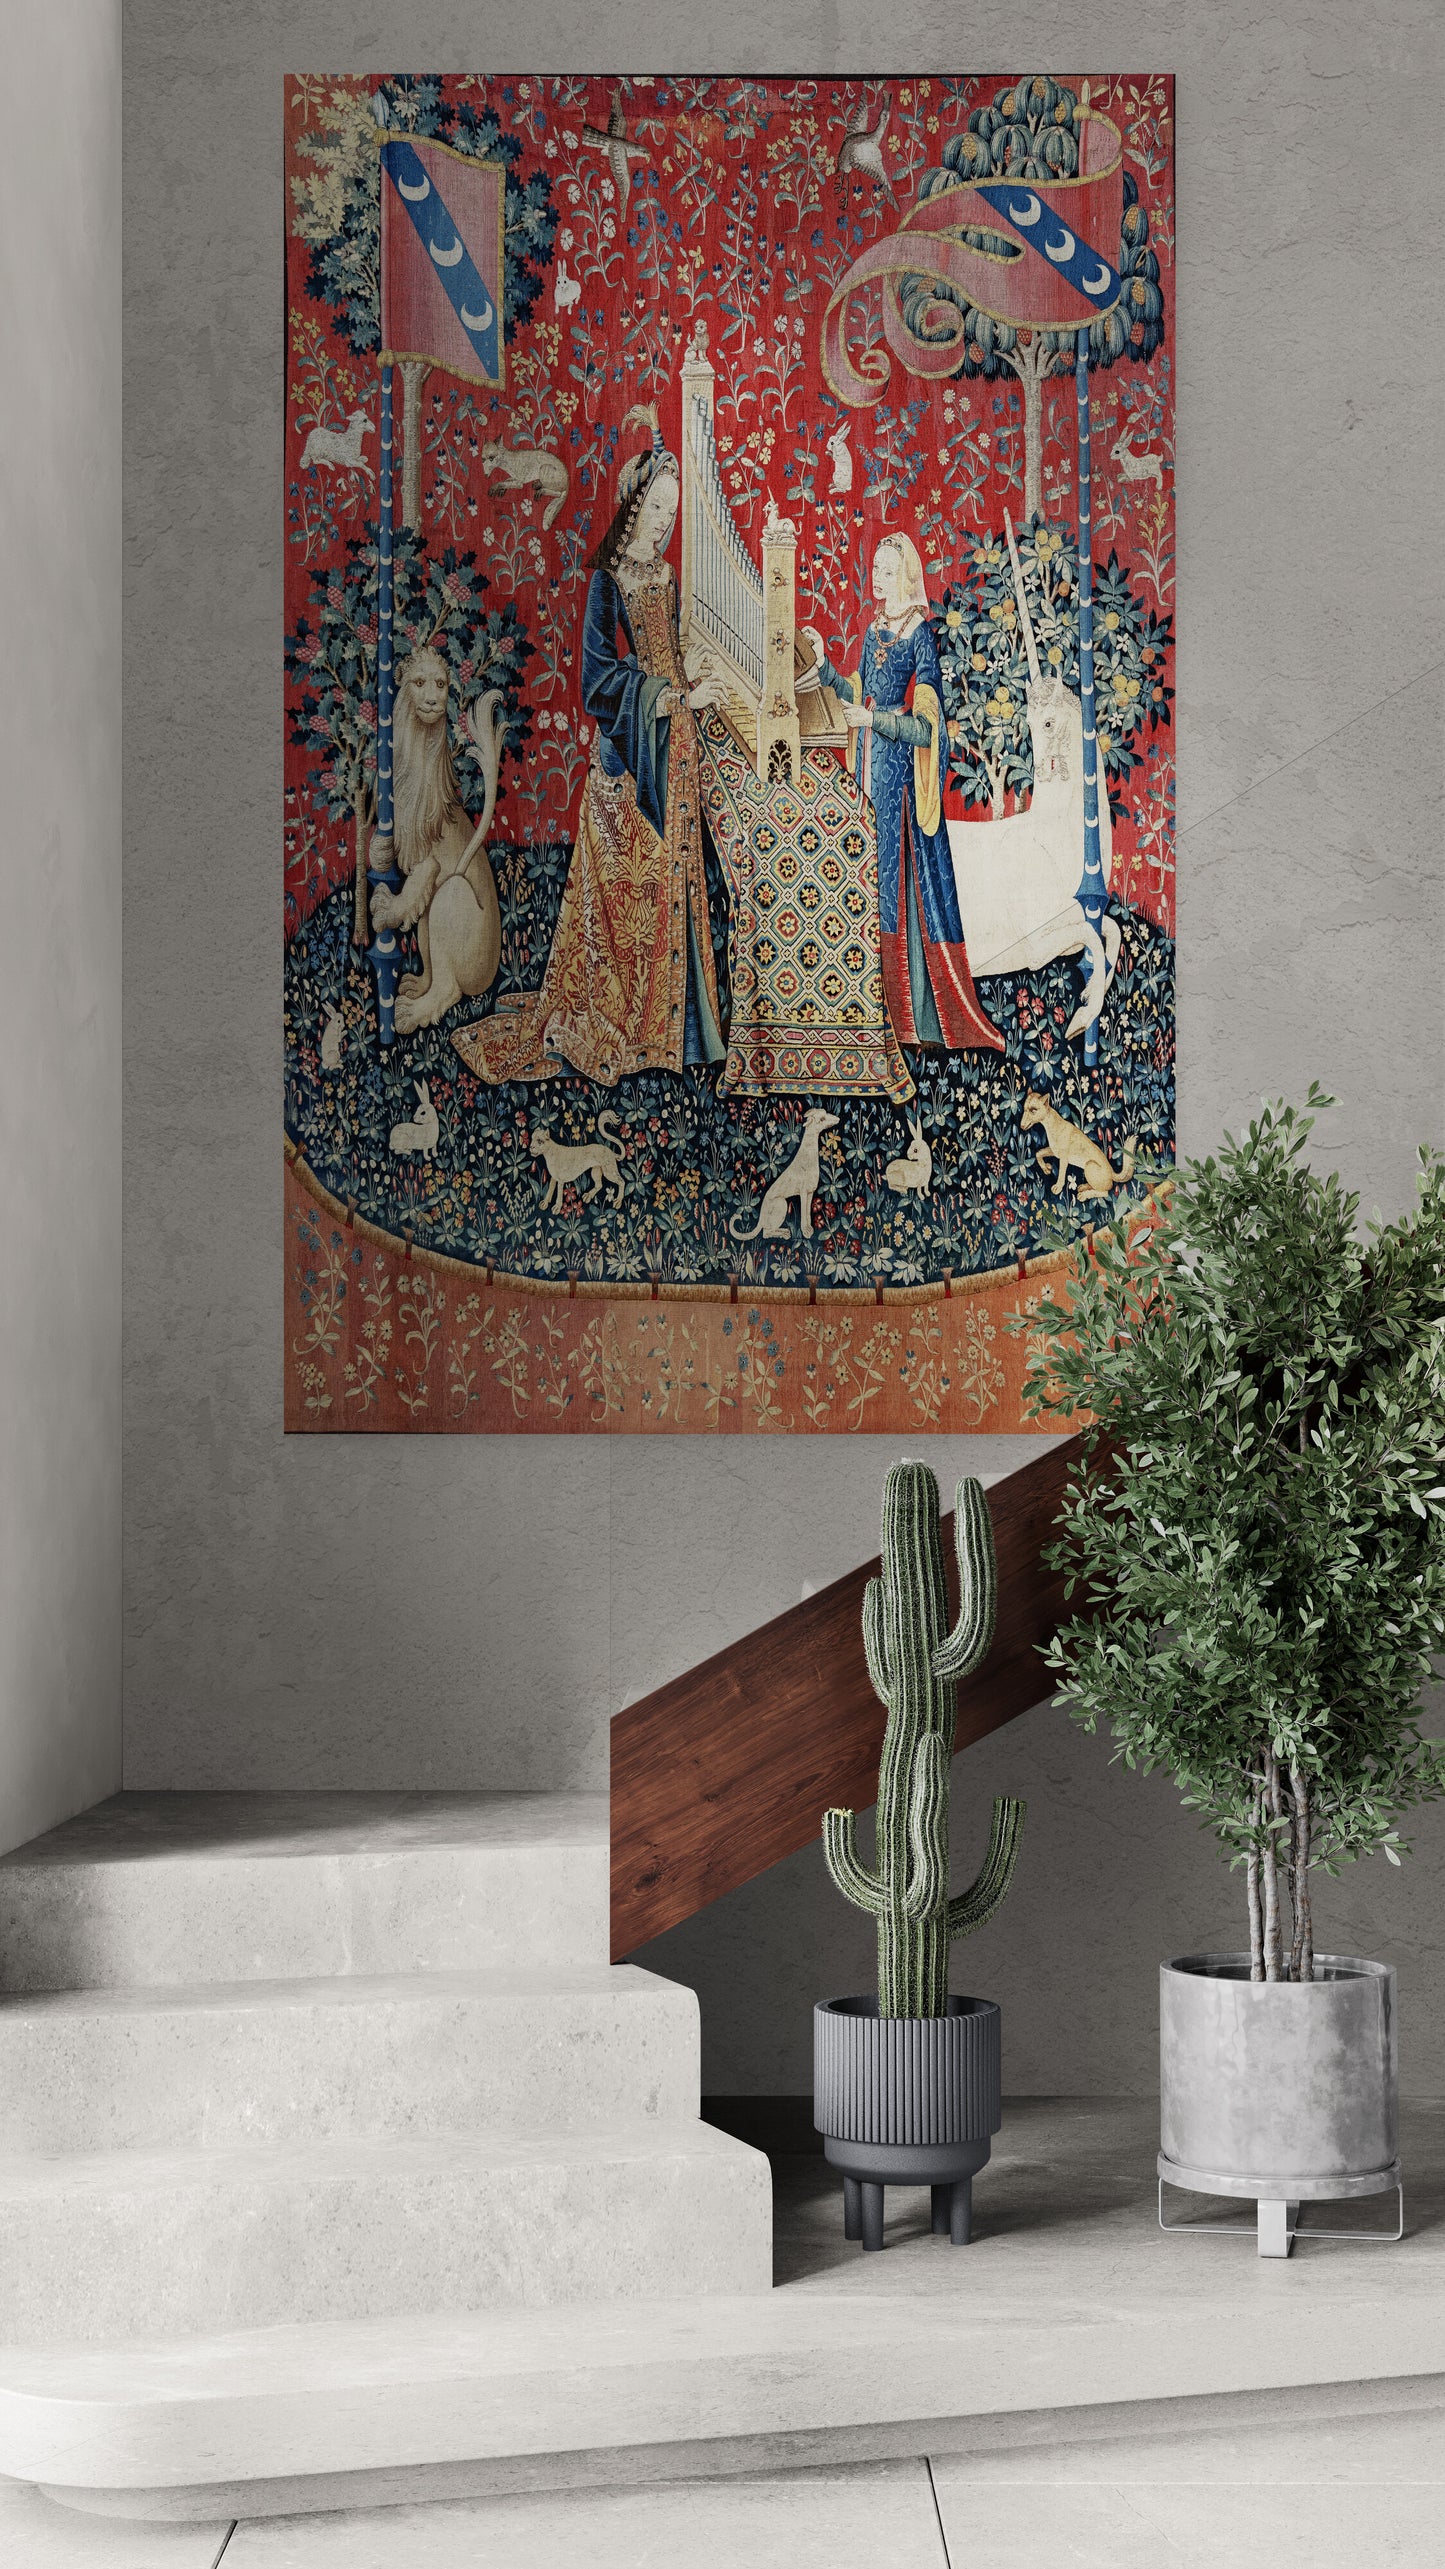 Enchanting Medieval Tapestry Lady and the Unicorn "Sound" Choice of Woven Tapestry or Fabric Print RE978887